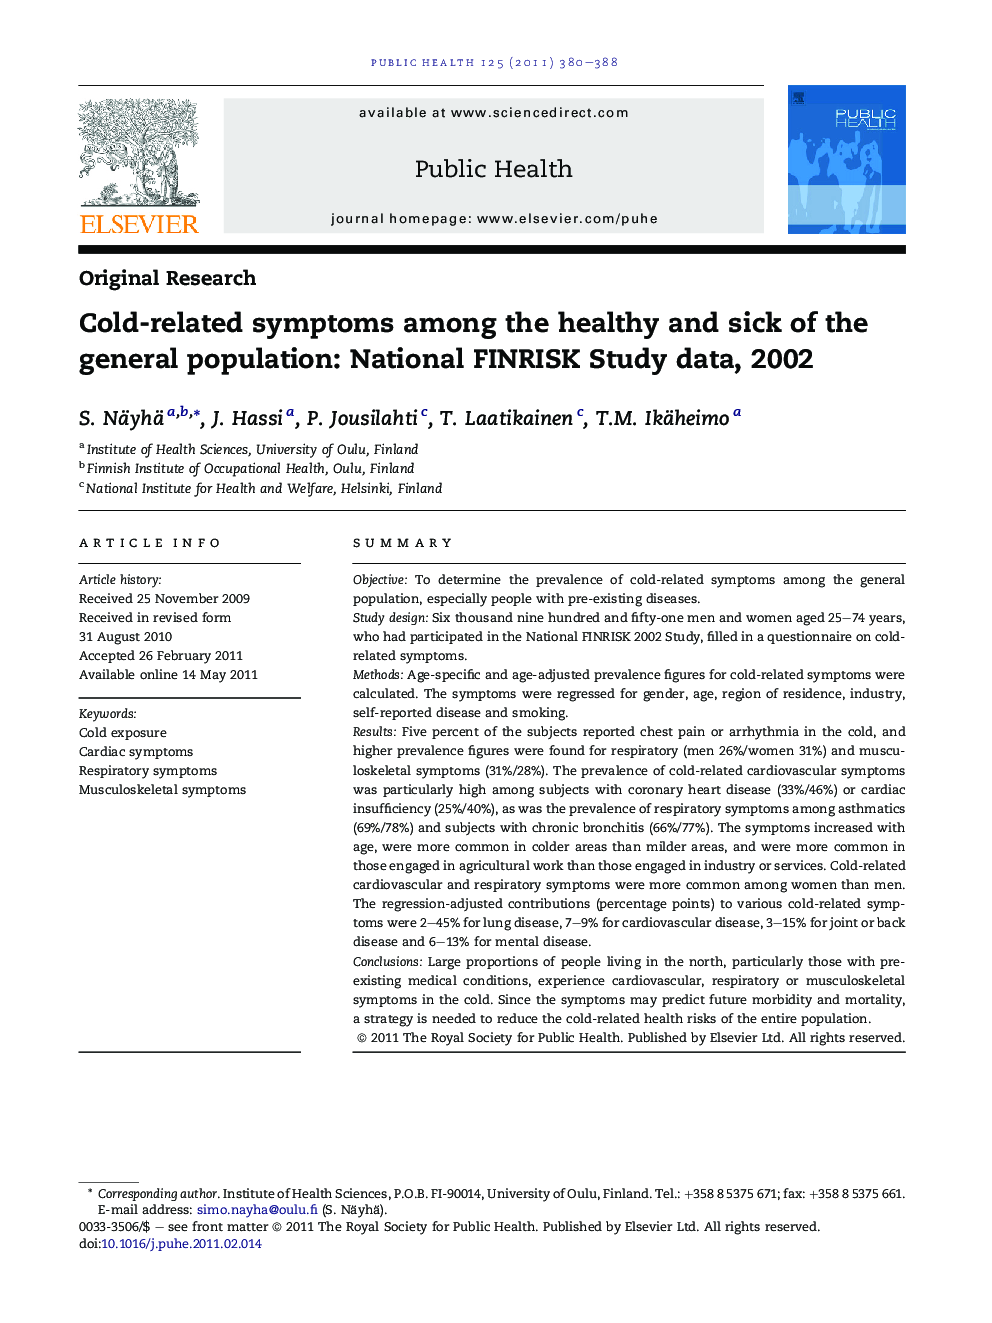 Cold-related symptoms among the healthy and sick of the general population: National FINRISK Study data, 2002